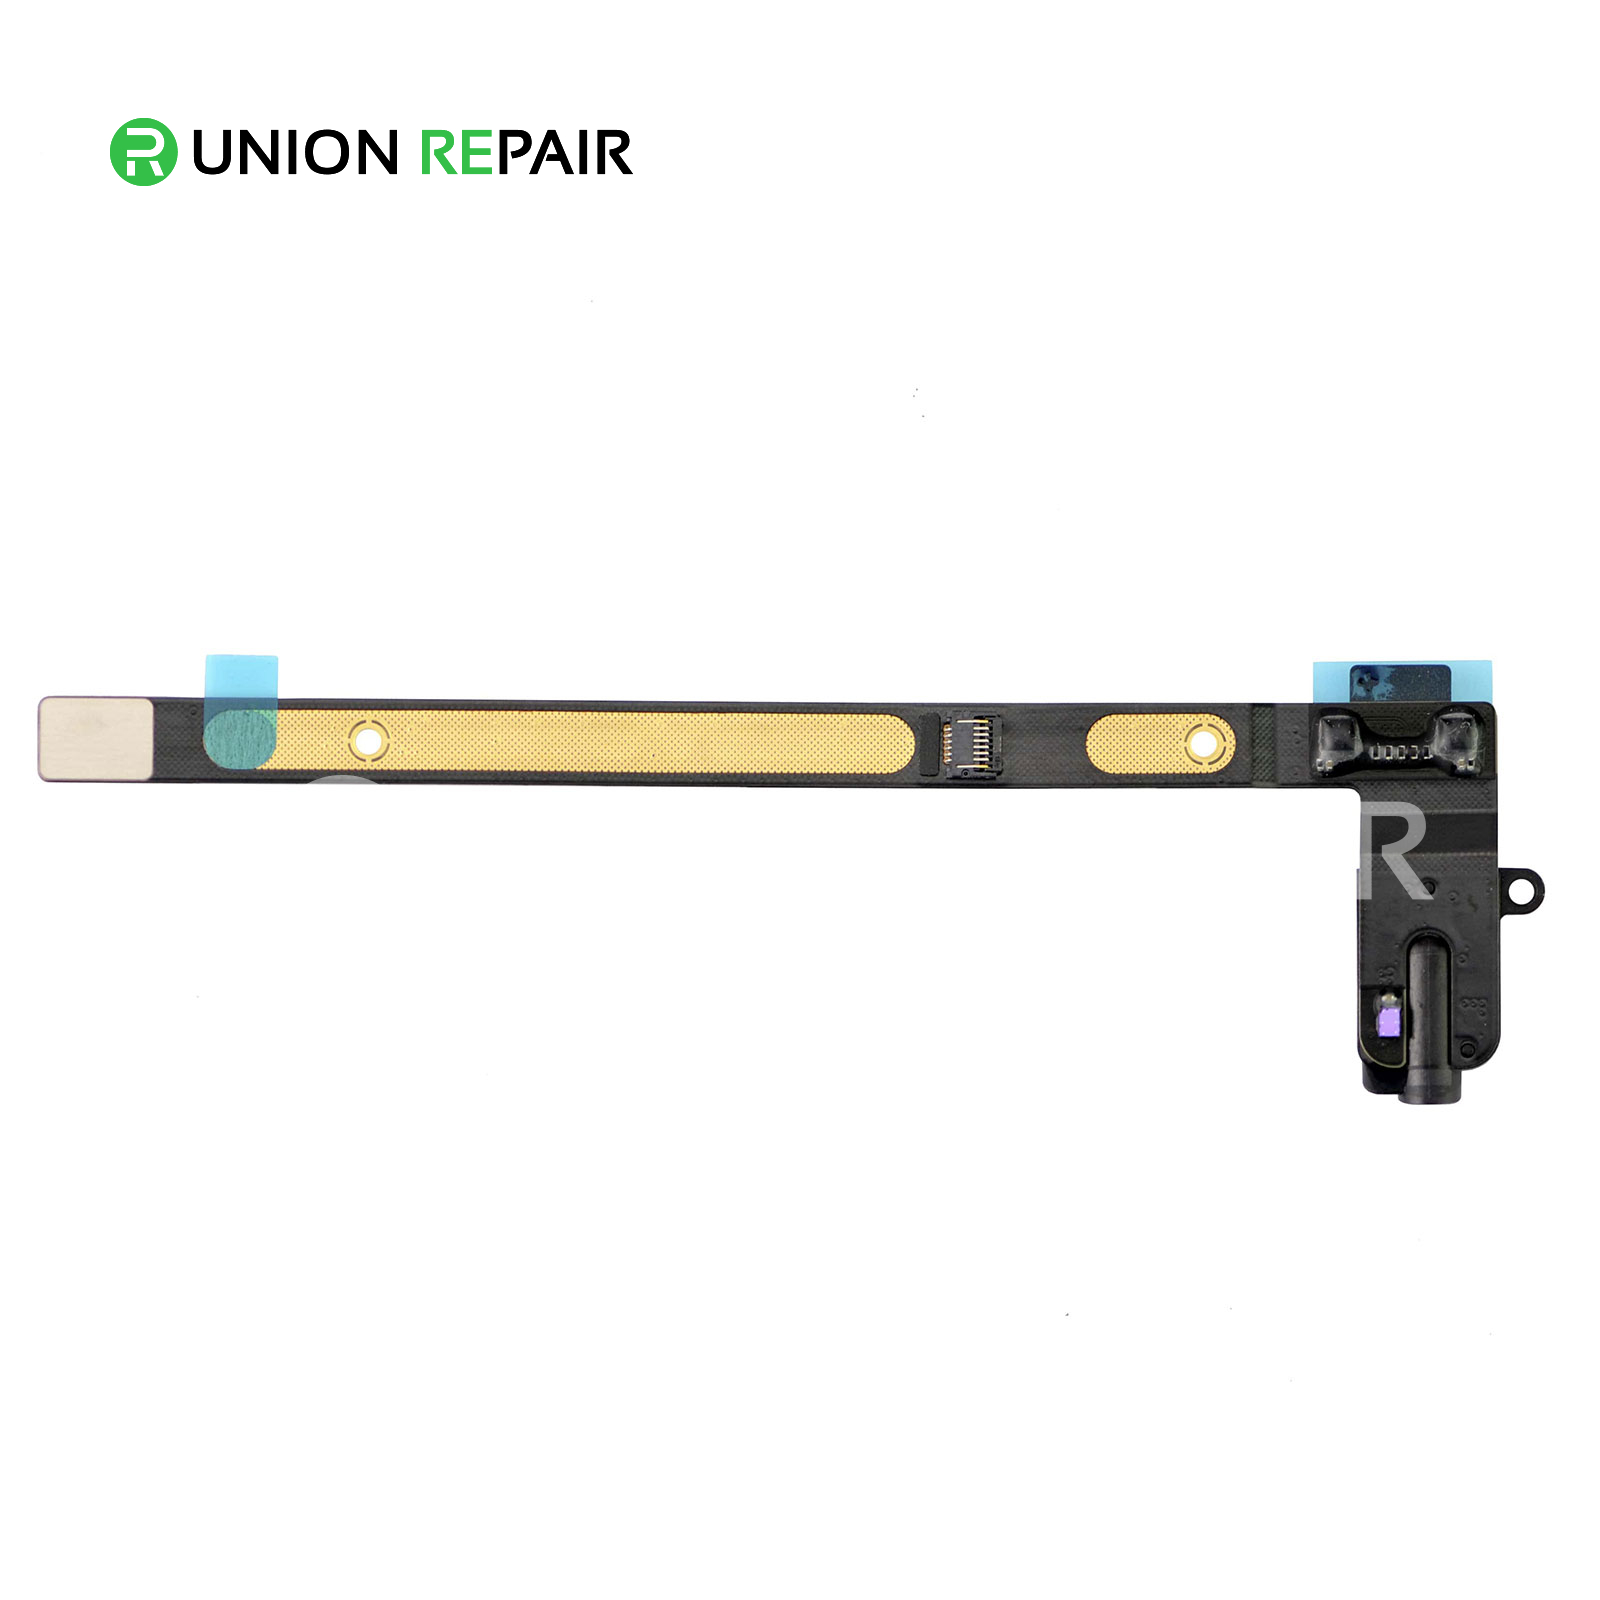 Headphone Audio Jack Ribbon Flex Cable Replacement for Apple iPad 3 Wifi Version